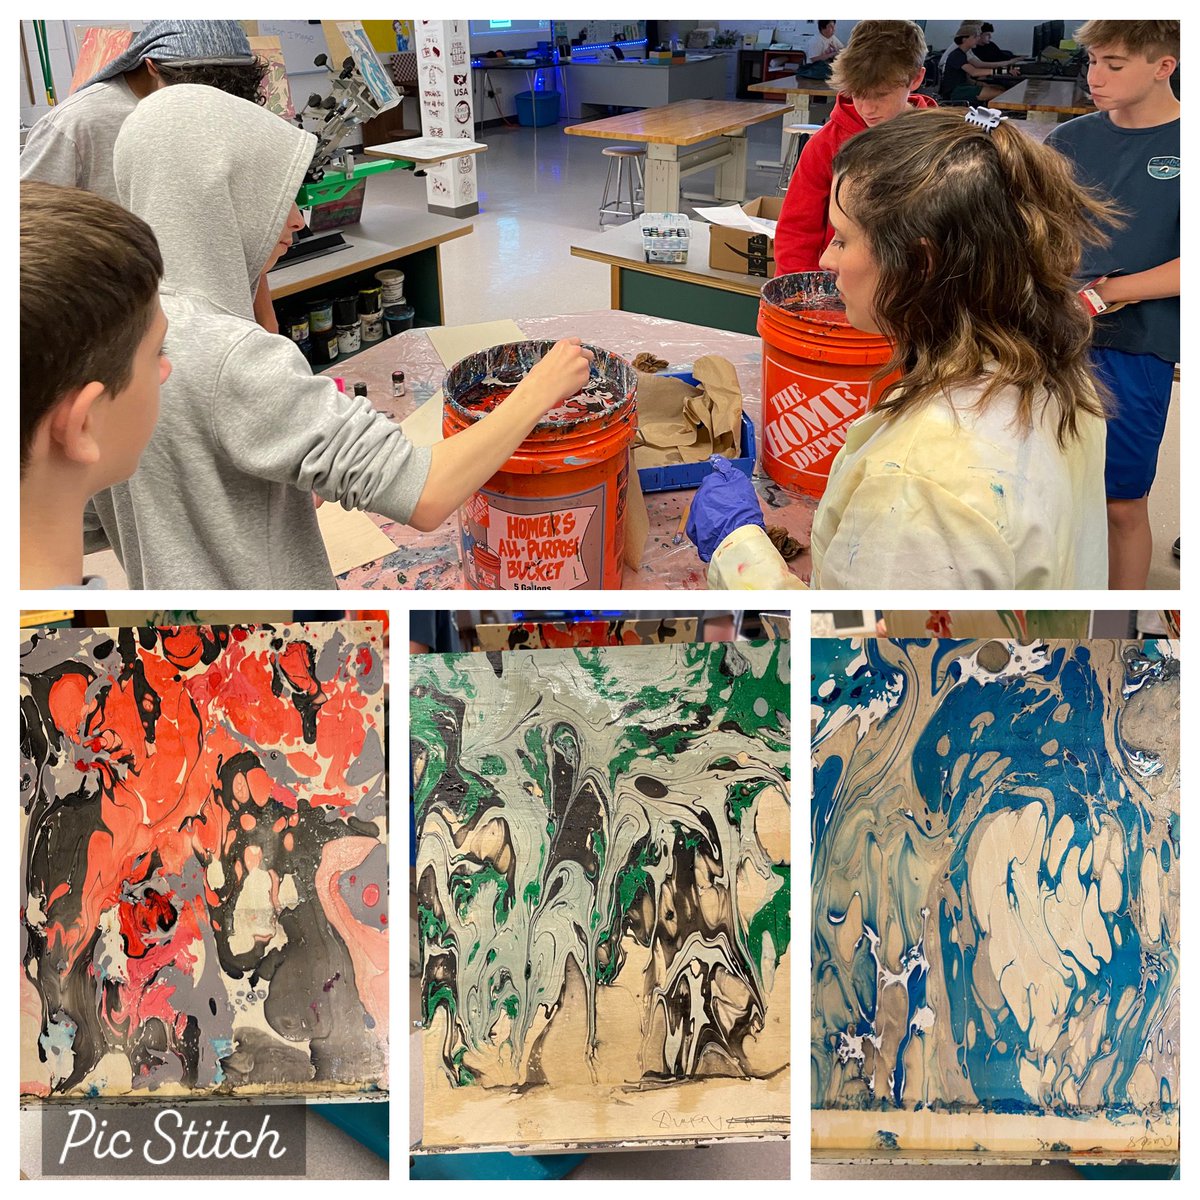 8th Grade students in Tech Ed are working through the hydro dipping phase of their projects. Hydro dipping works by transferring paint from the surface of water directly onto a 3-D object, creating marbled effect. Amazing color combinations being created! #OneEyer #EastPennPROUD